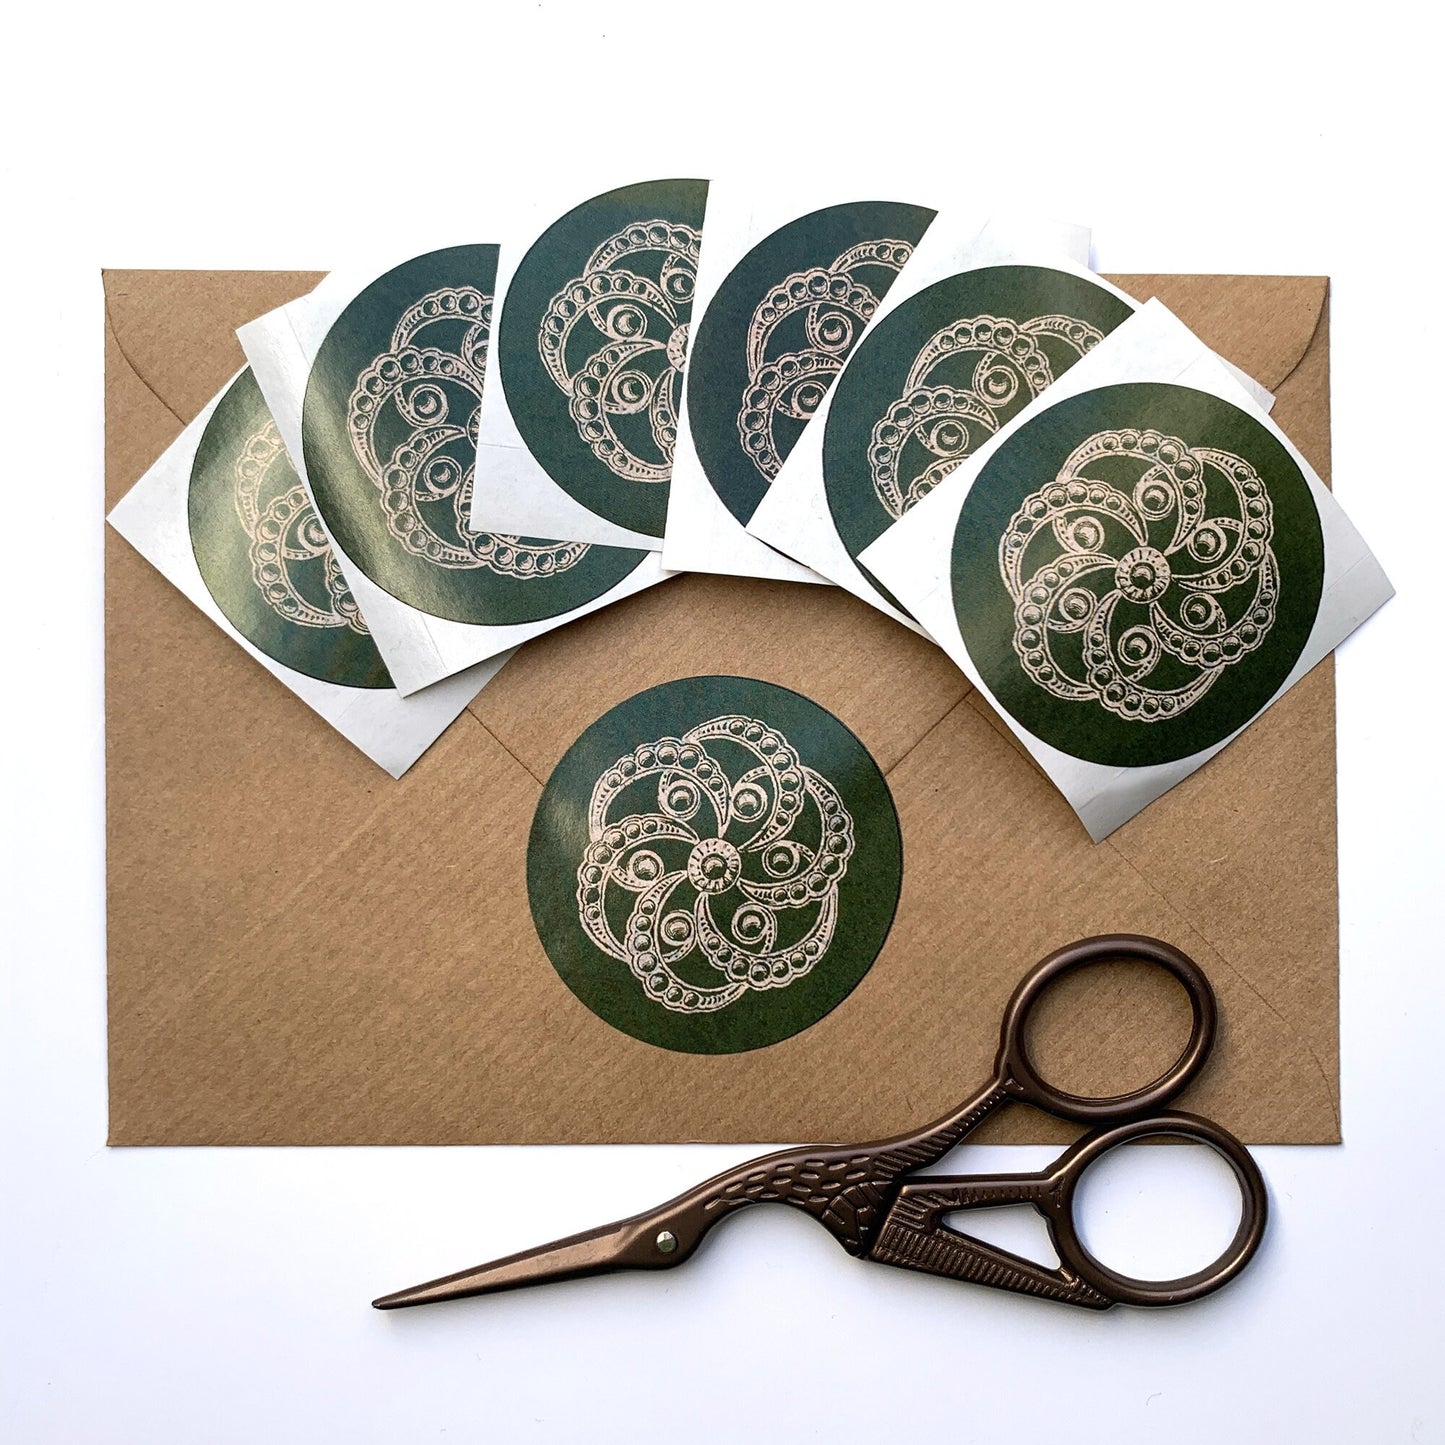 6 letter seal stickers 'Nature Academia II' 50mm round